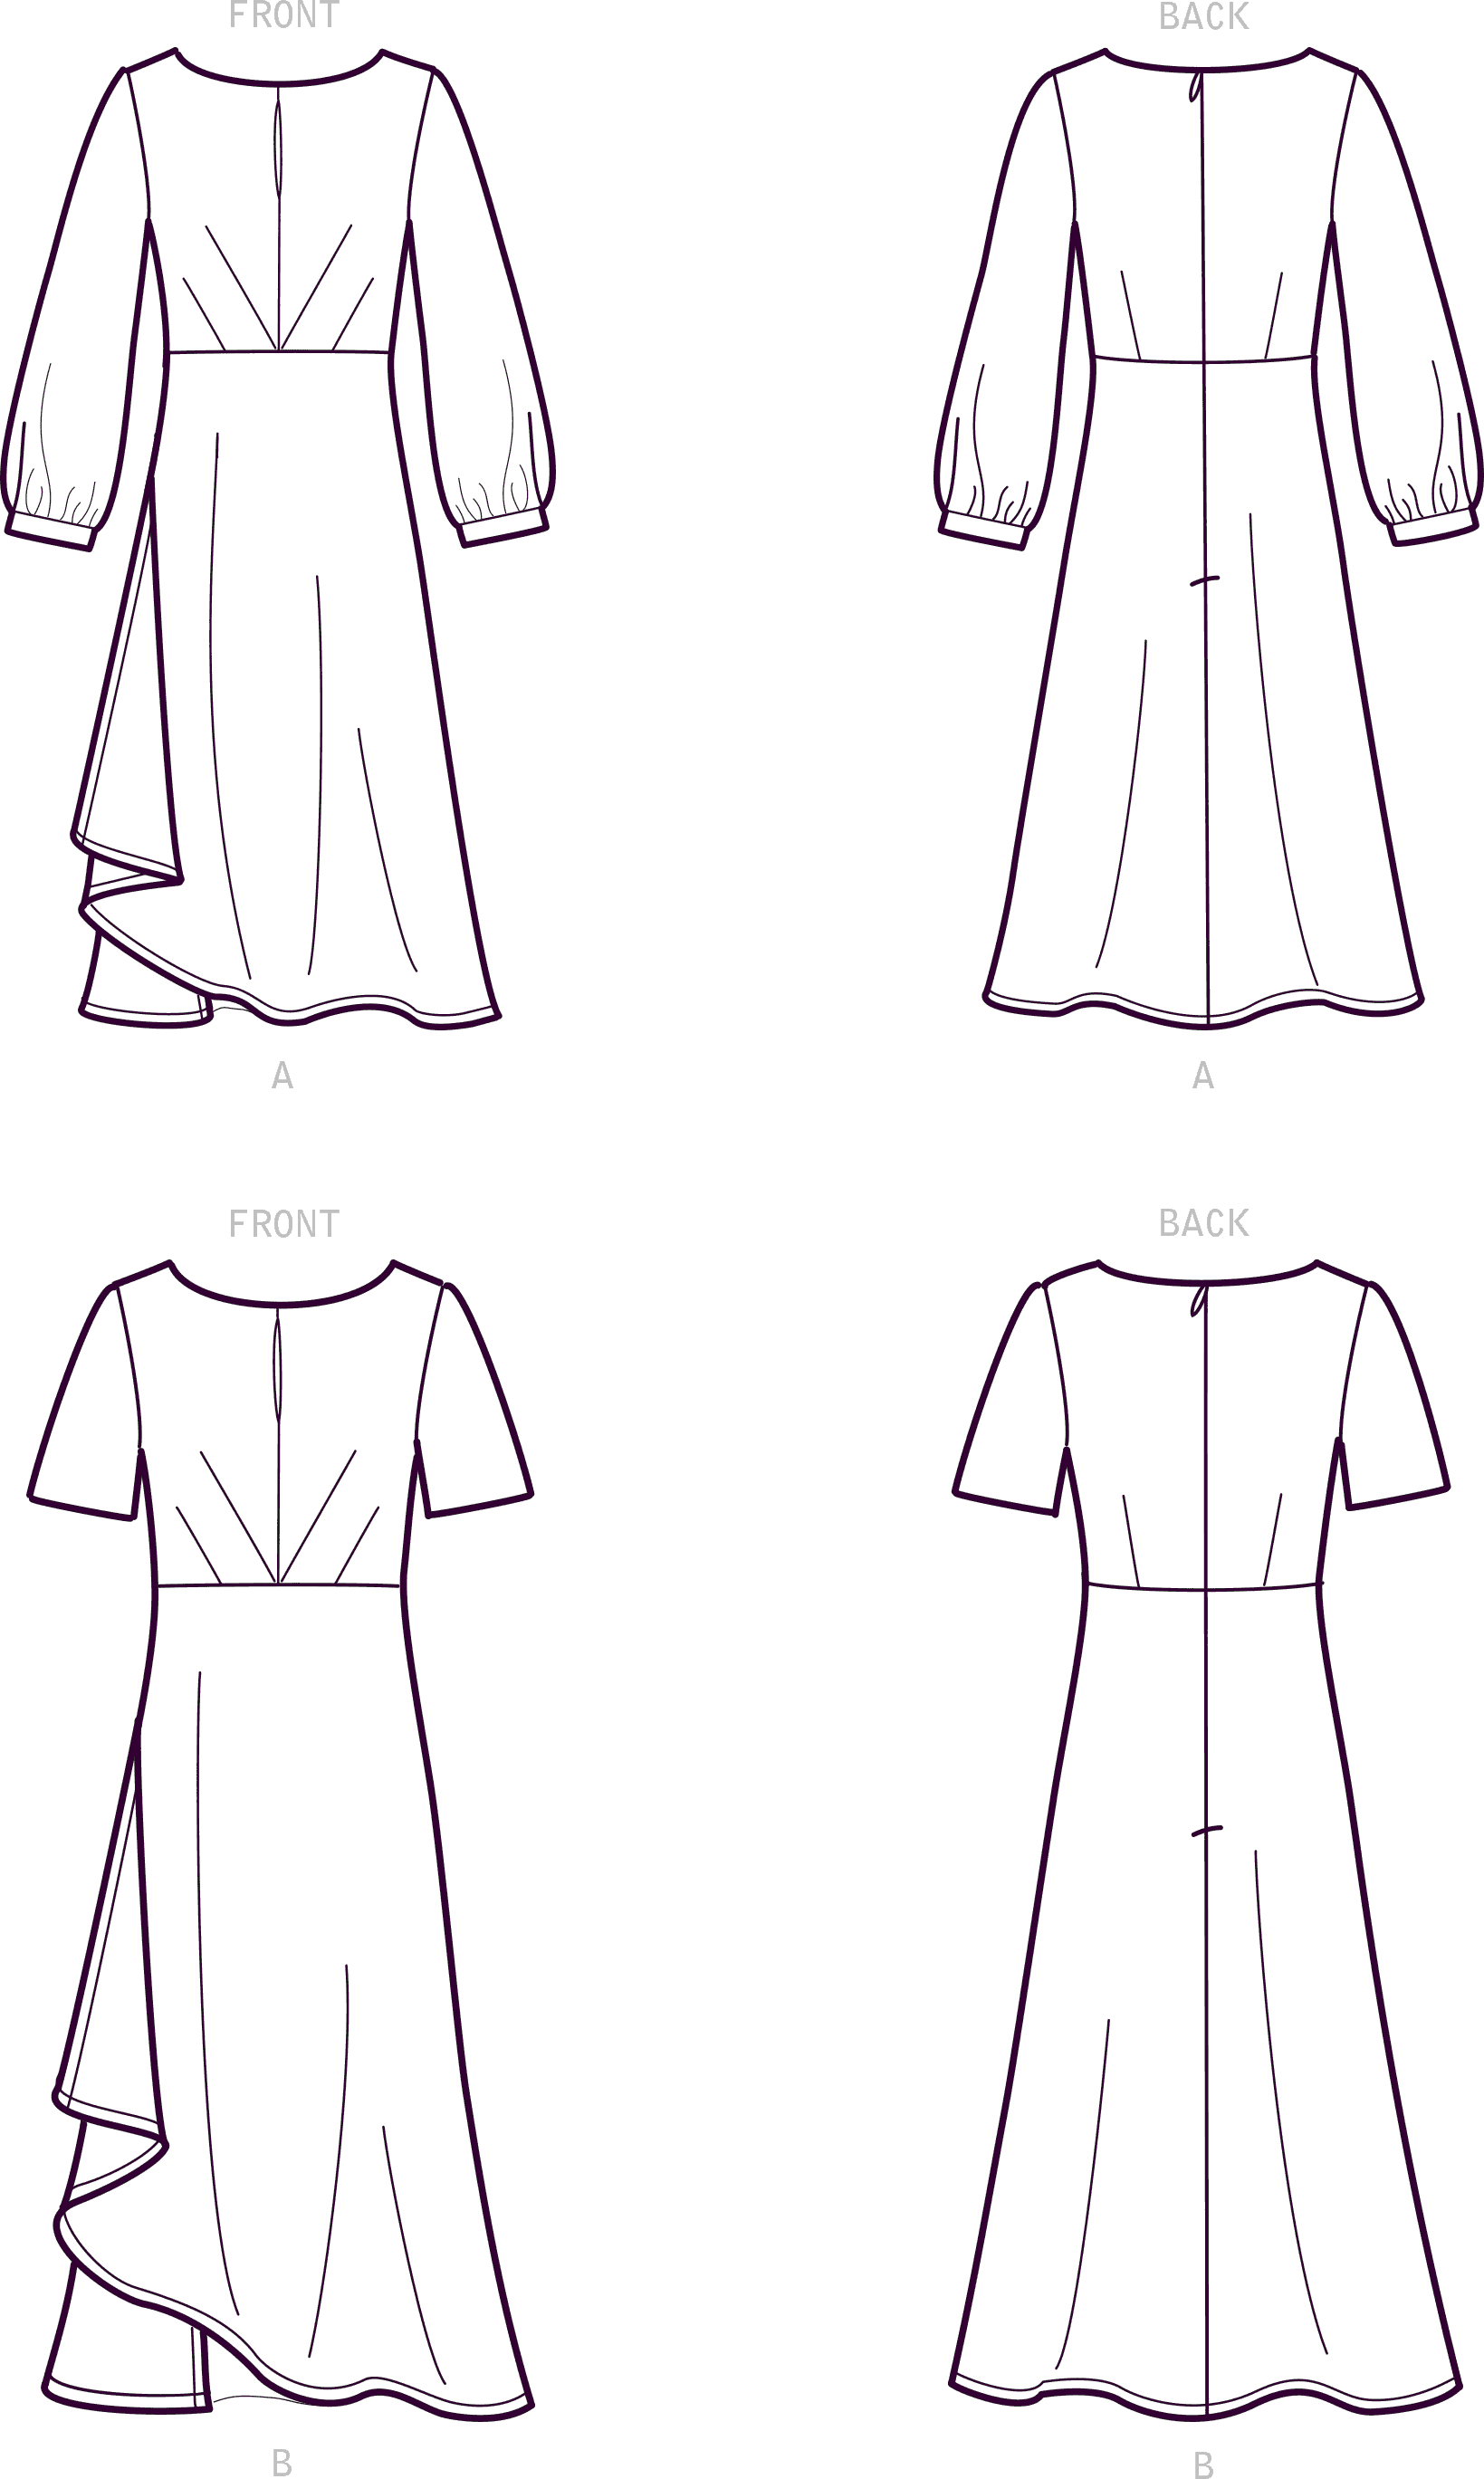 New Look Sewing Pattern N6655 Misses Dress In Two Lengths With Sleeve Variations 6655 Line Art From Patternsandplains.com